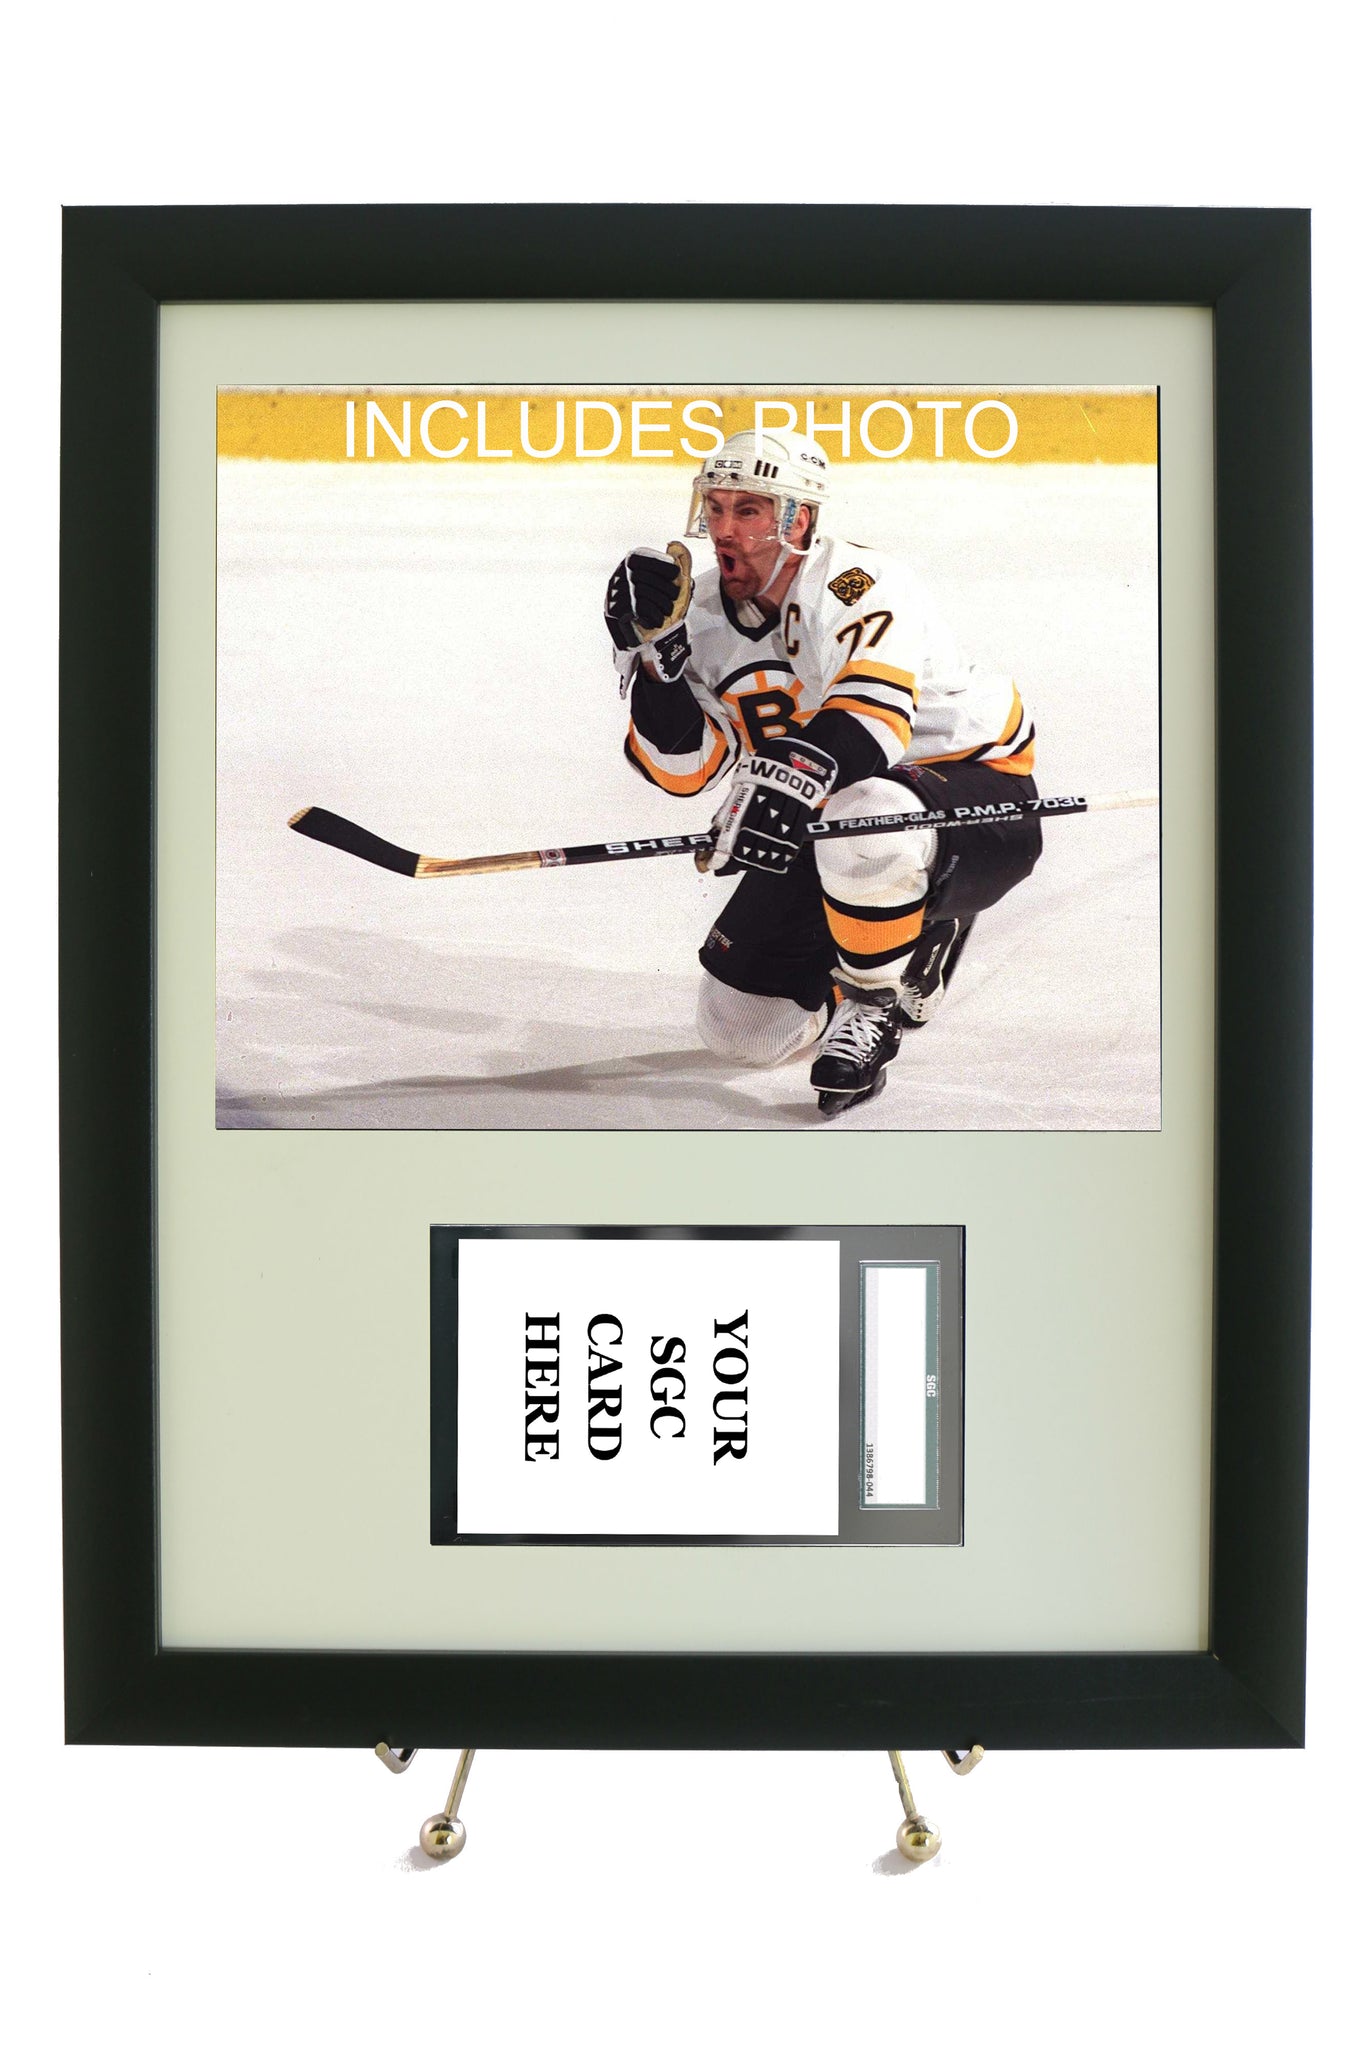 Sports Card Frame for YOUR SGC Ray Bourque Card (INCLUDES PHOTO) - Graded And Framed